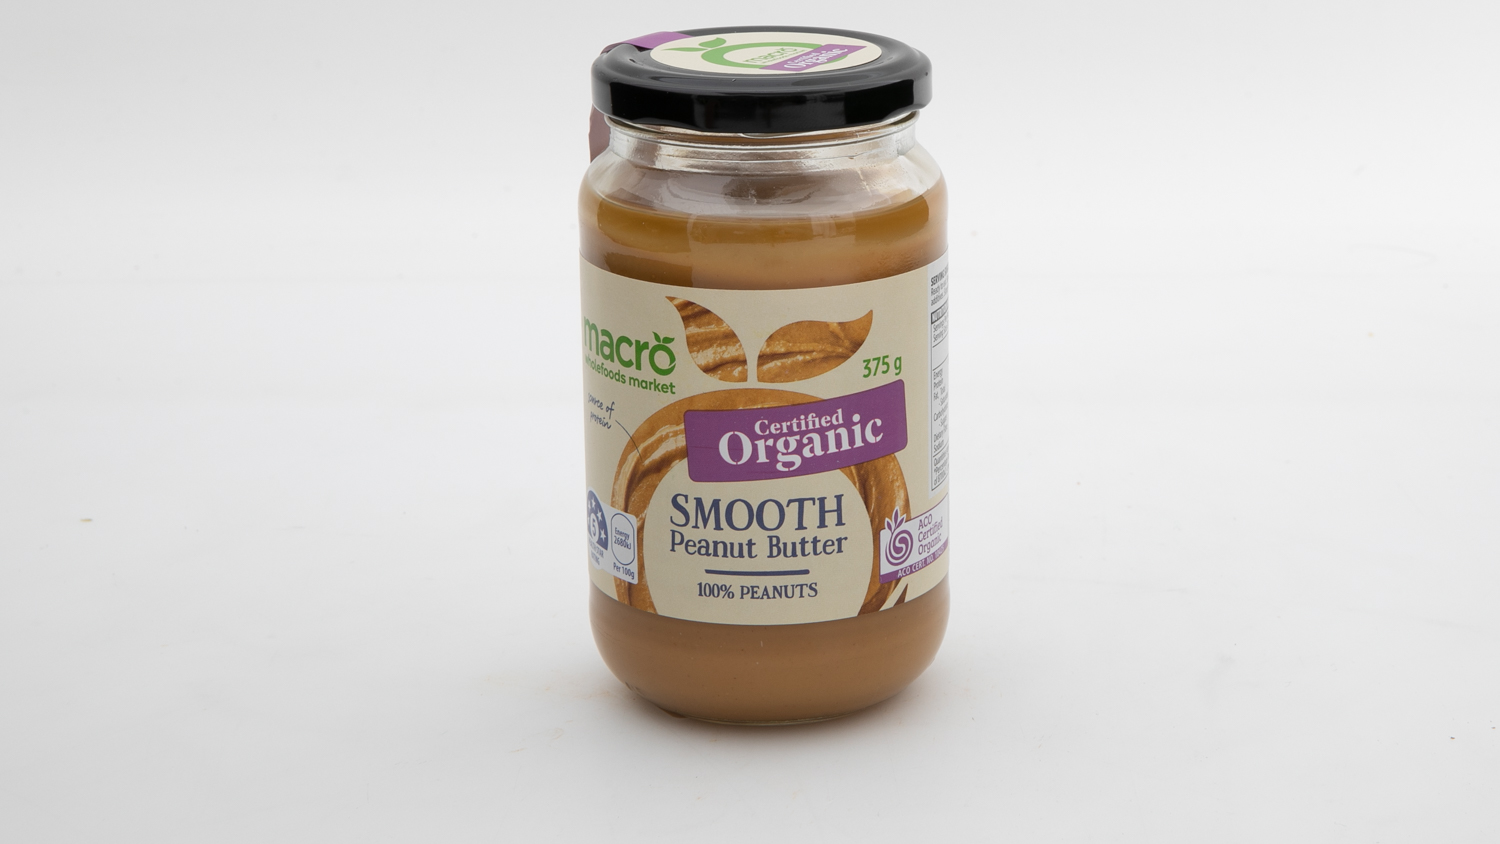 Woolworths Macro Certified Organic Peanut Butter Smooth carousel image